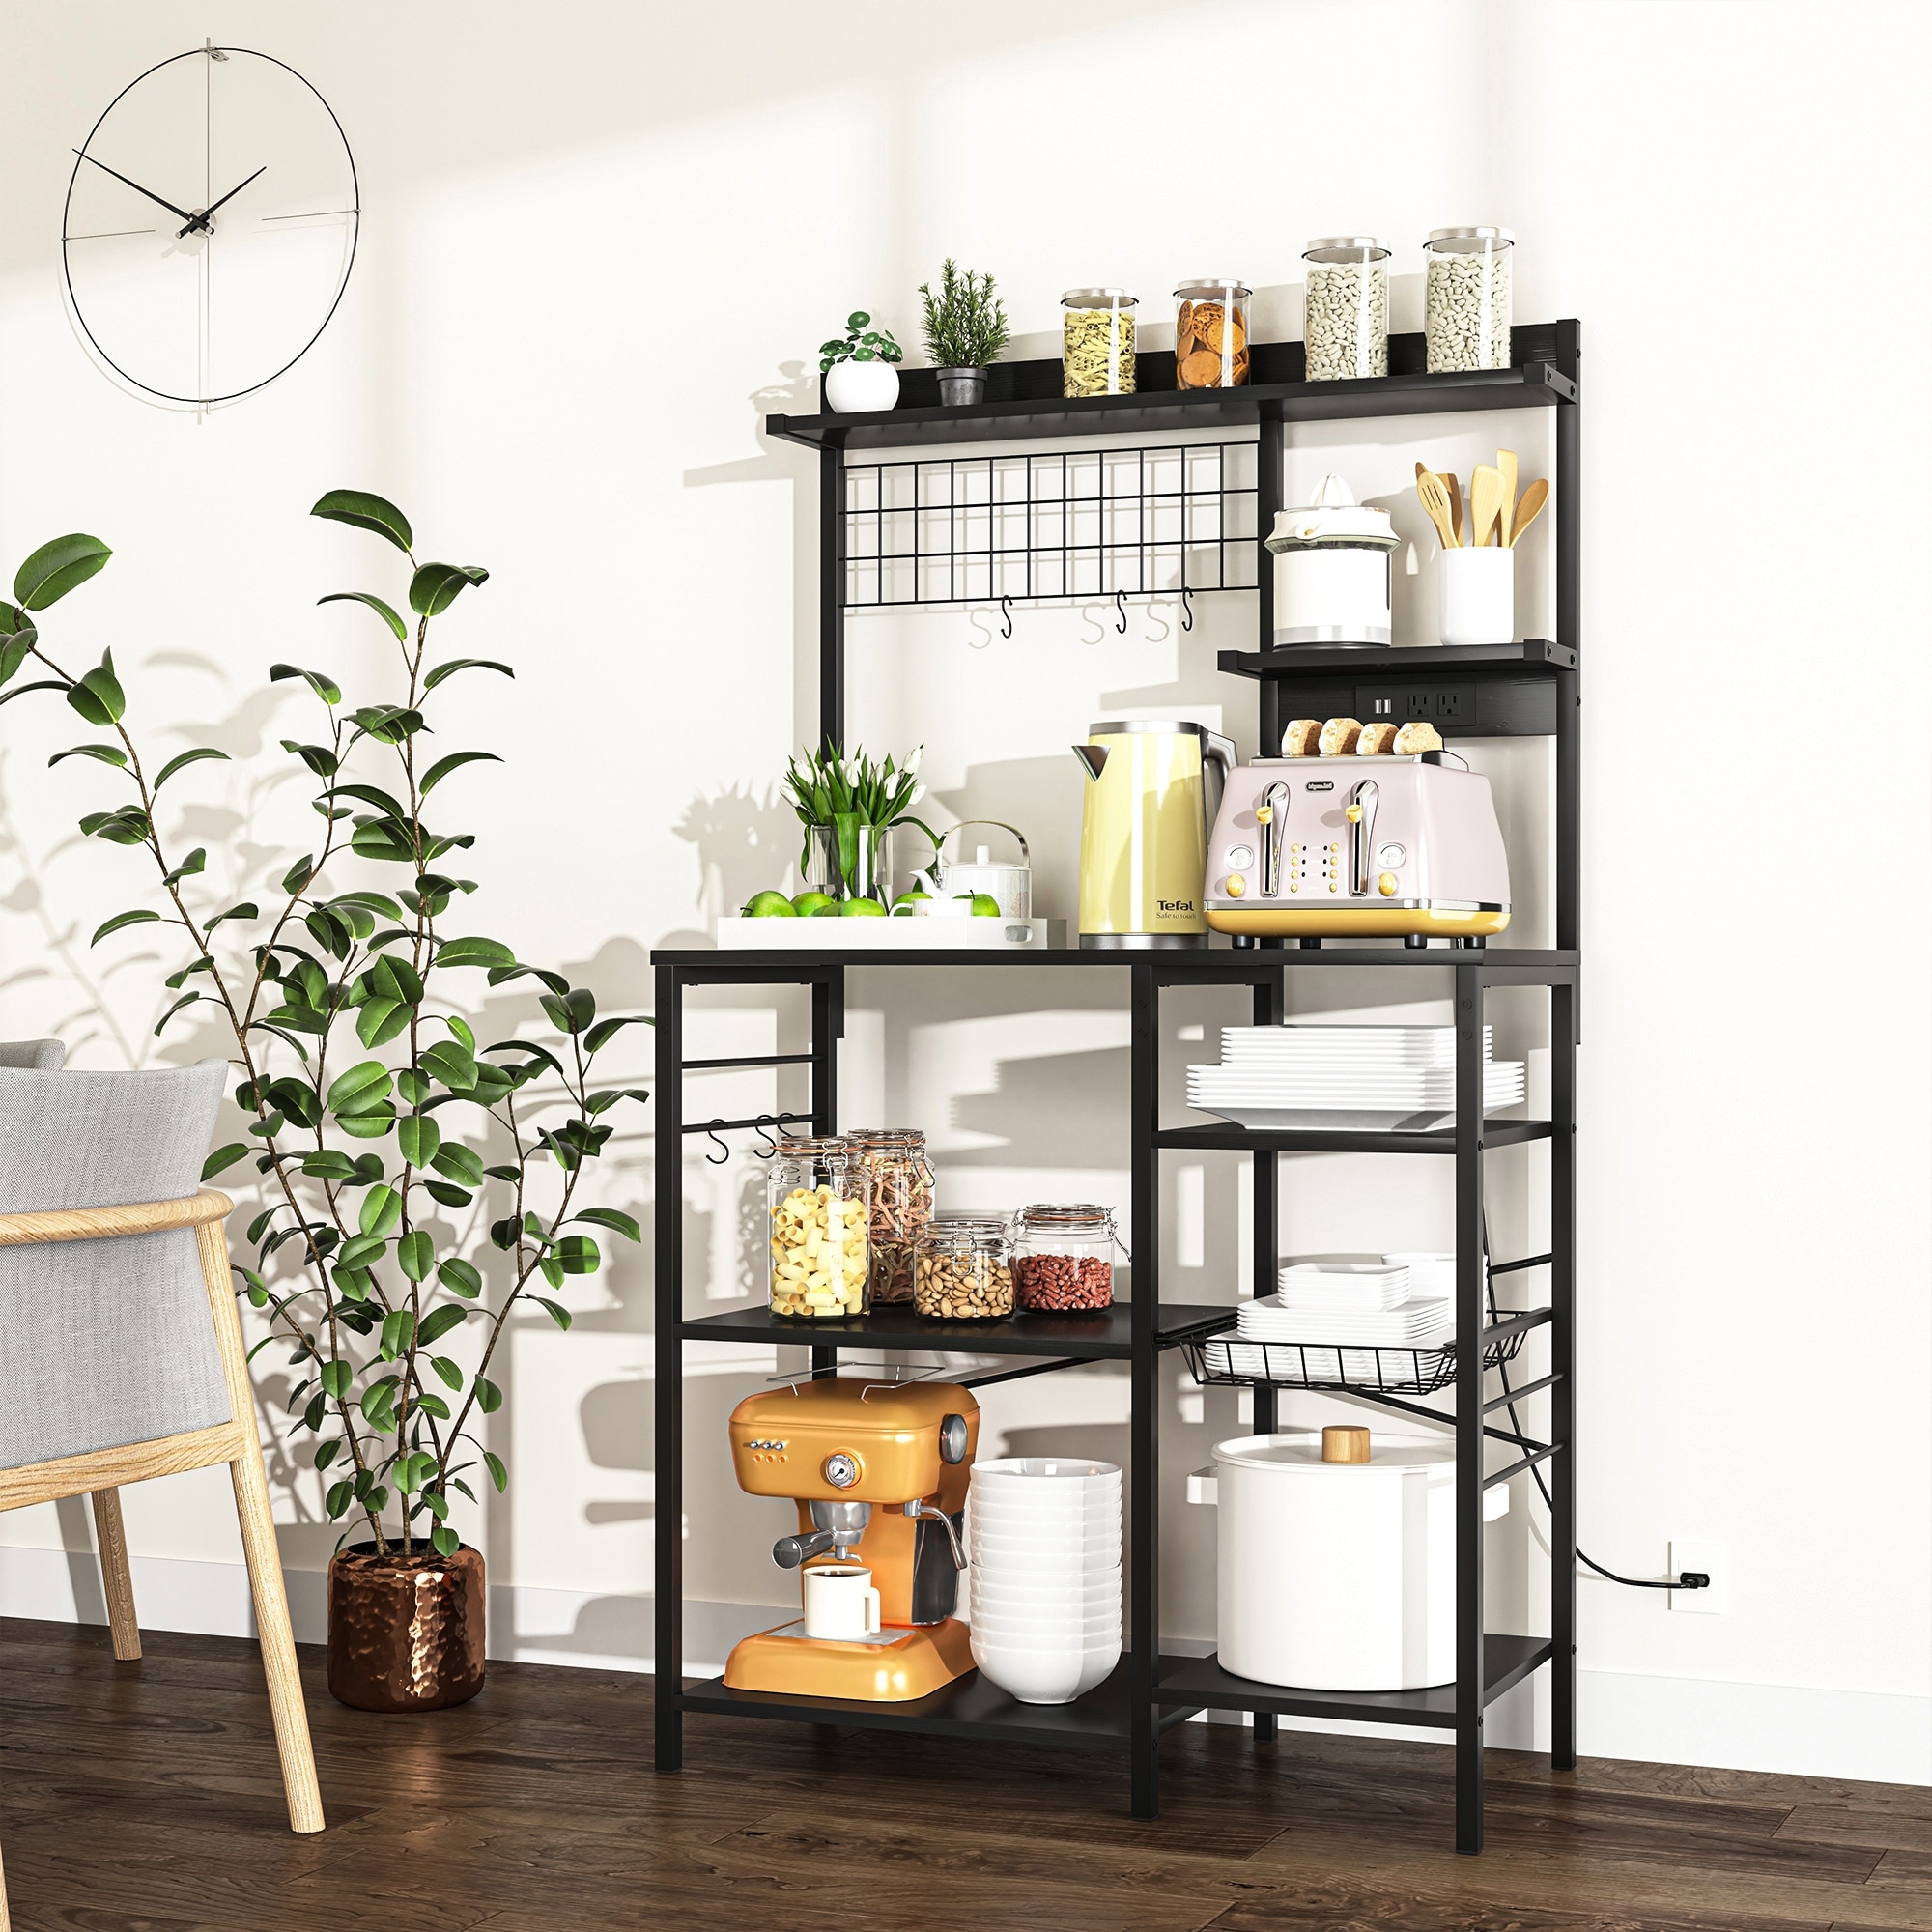 https://ak1.ostkcdn.com/images/products/is/images/direct/f71e3c514aae4f3f1b627f51dbfe30d56dda9b8d/Multifunctional-Kitchen-Shelf-with-Charging-Board-and-Hooks.jpg